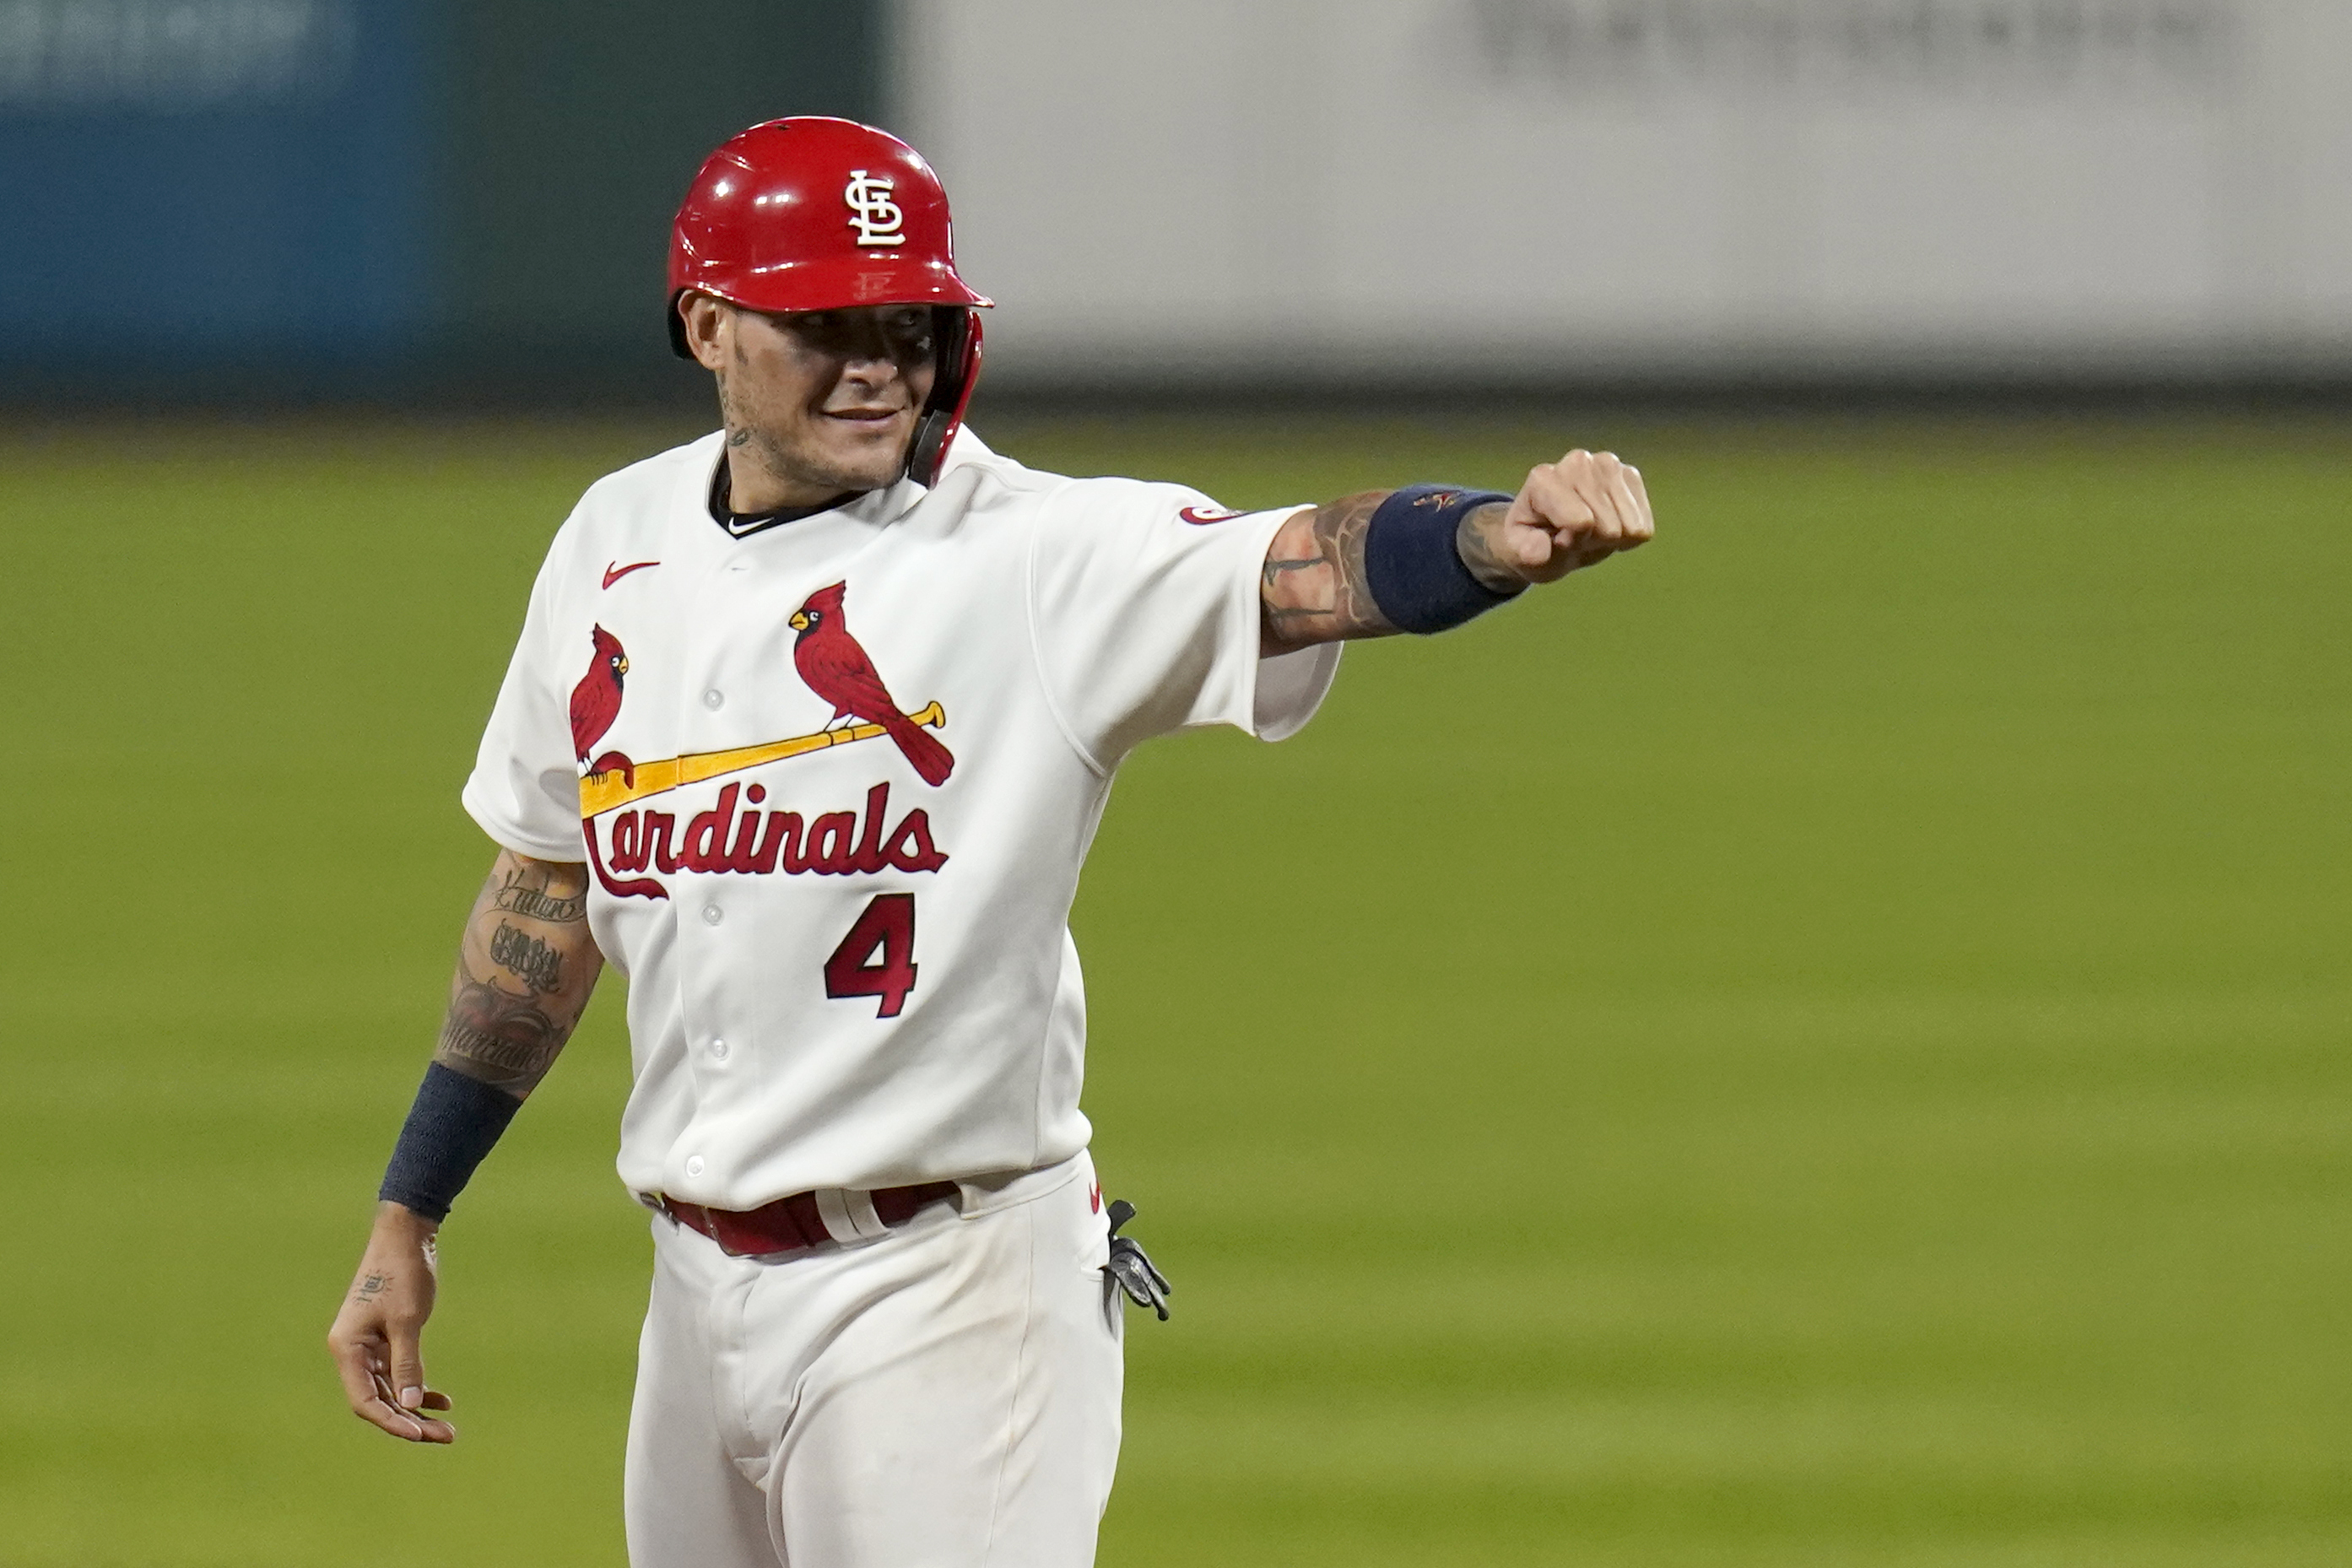 Molina joining elite group of Cardinals